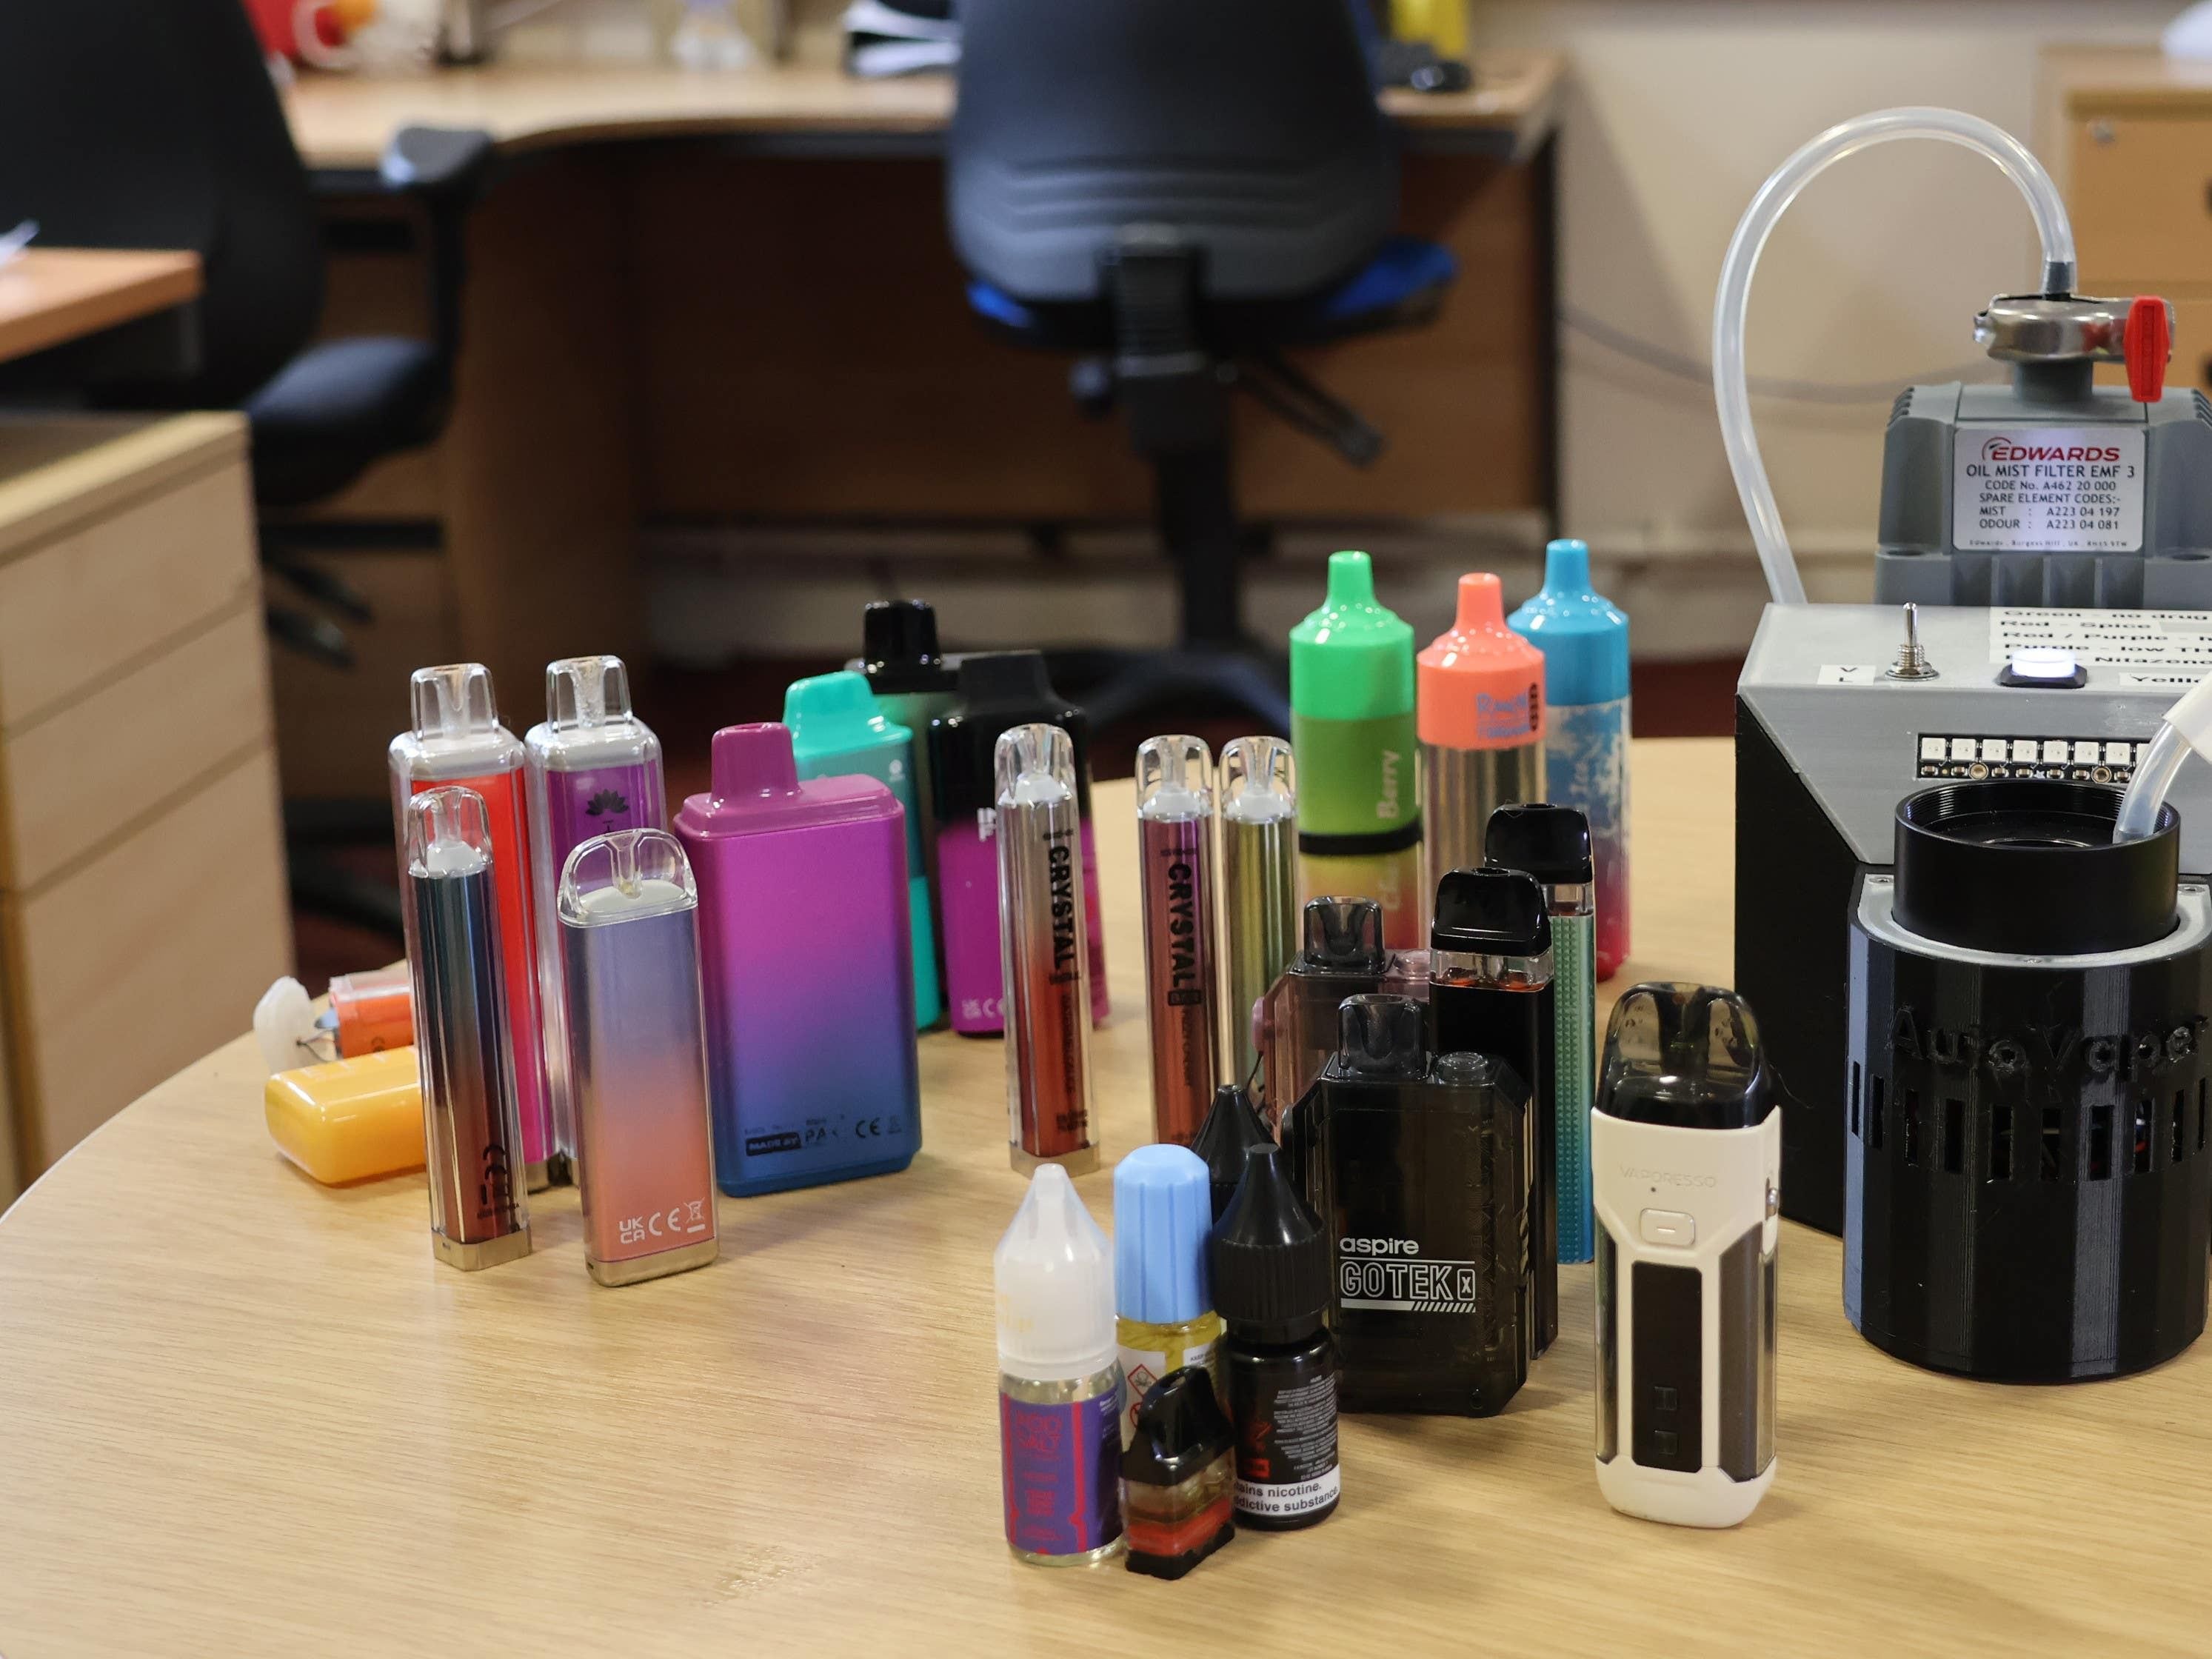 School children unwittingly smoking spice-spiked vapes, study finds